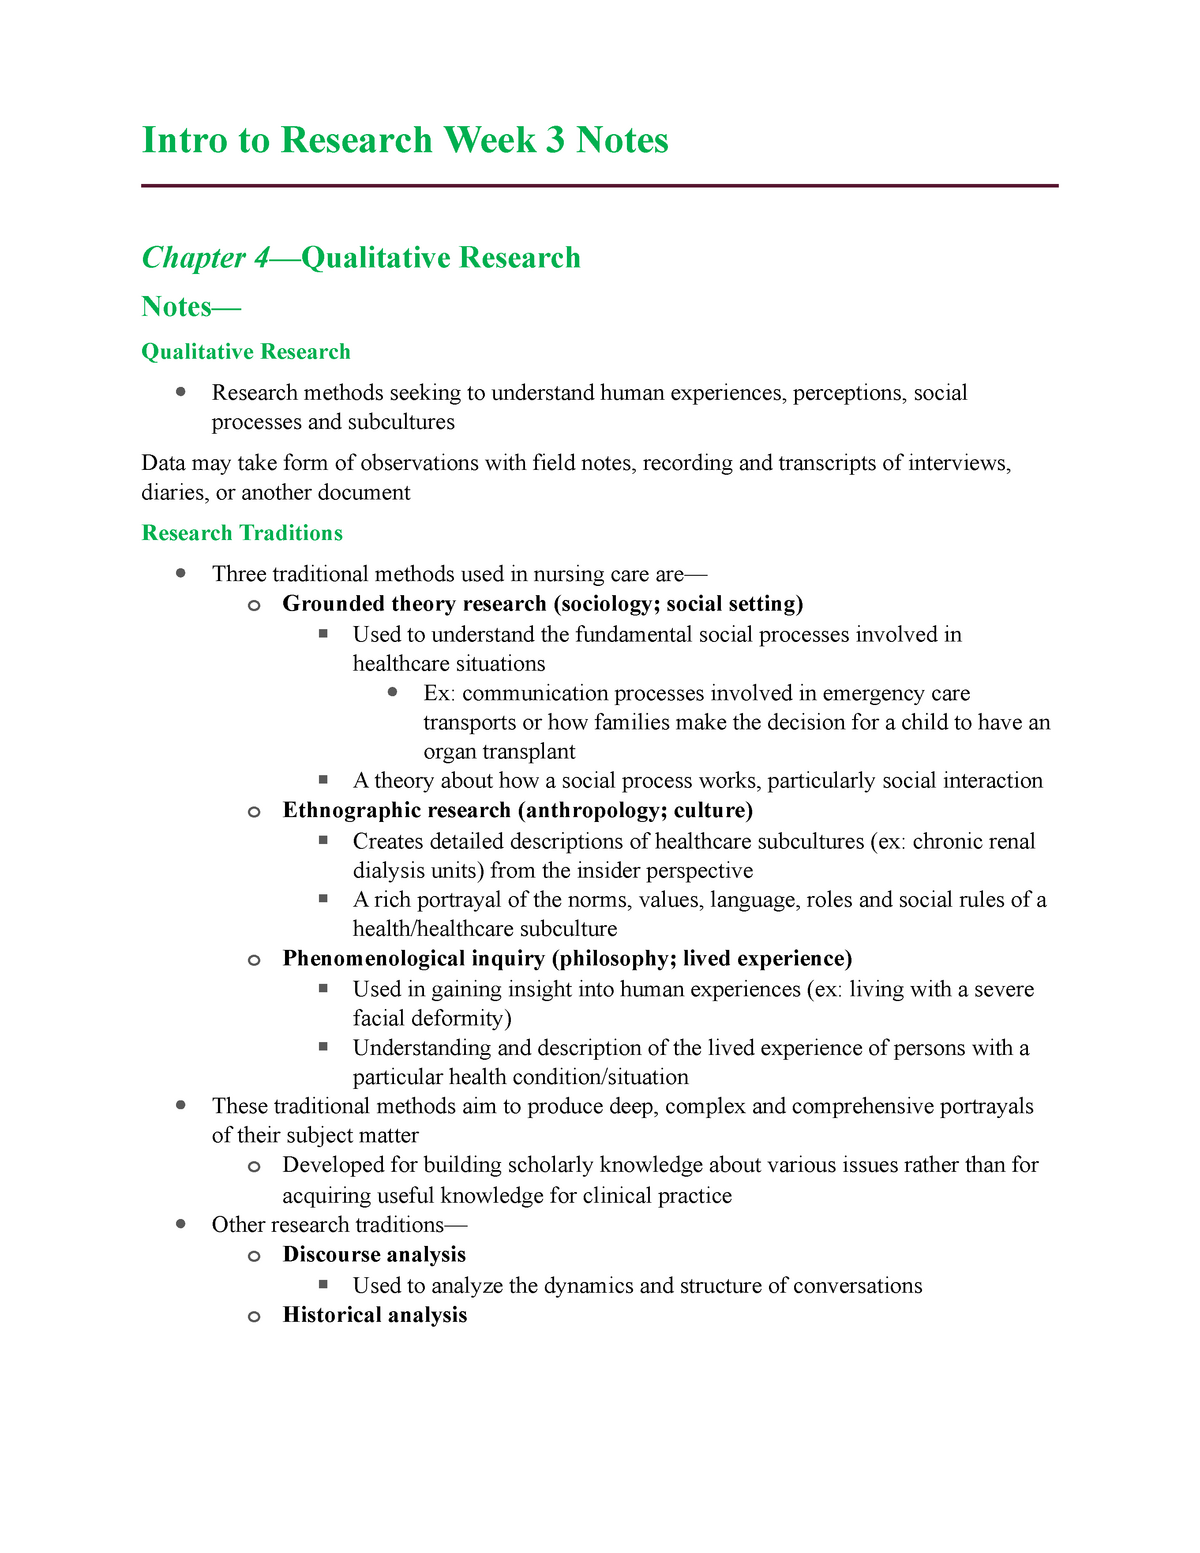 chapter 4 qualitative research parts